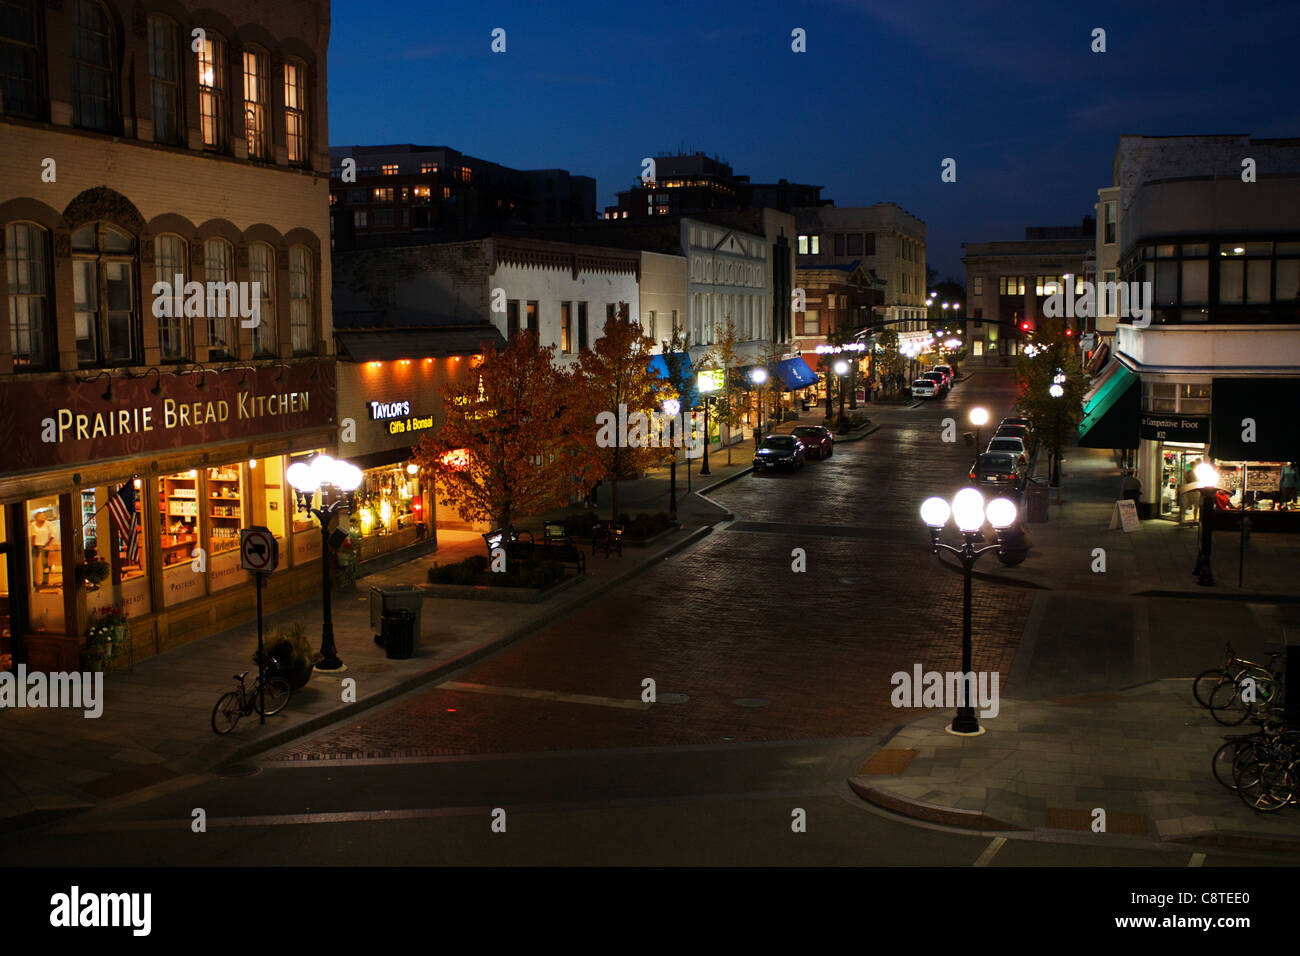 Evening_on_Marion_Street_and_Downtown_Oa